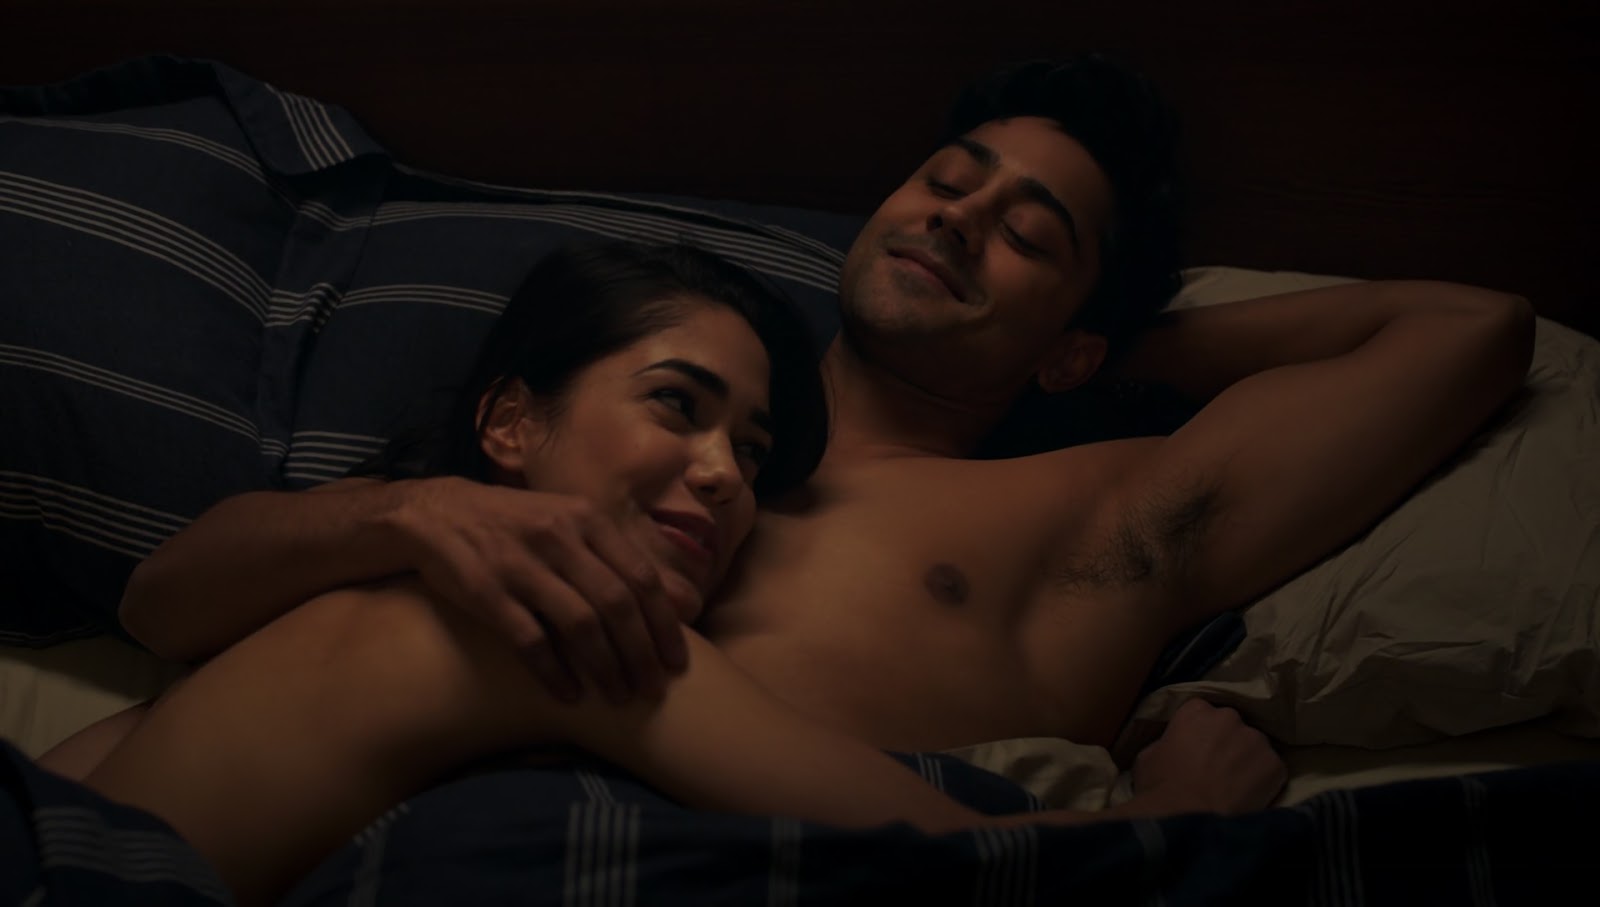 Manish Dayal shirtless in The Resident 1-04 "Identity Crisis" .